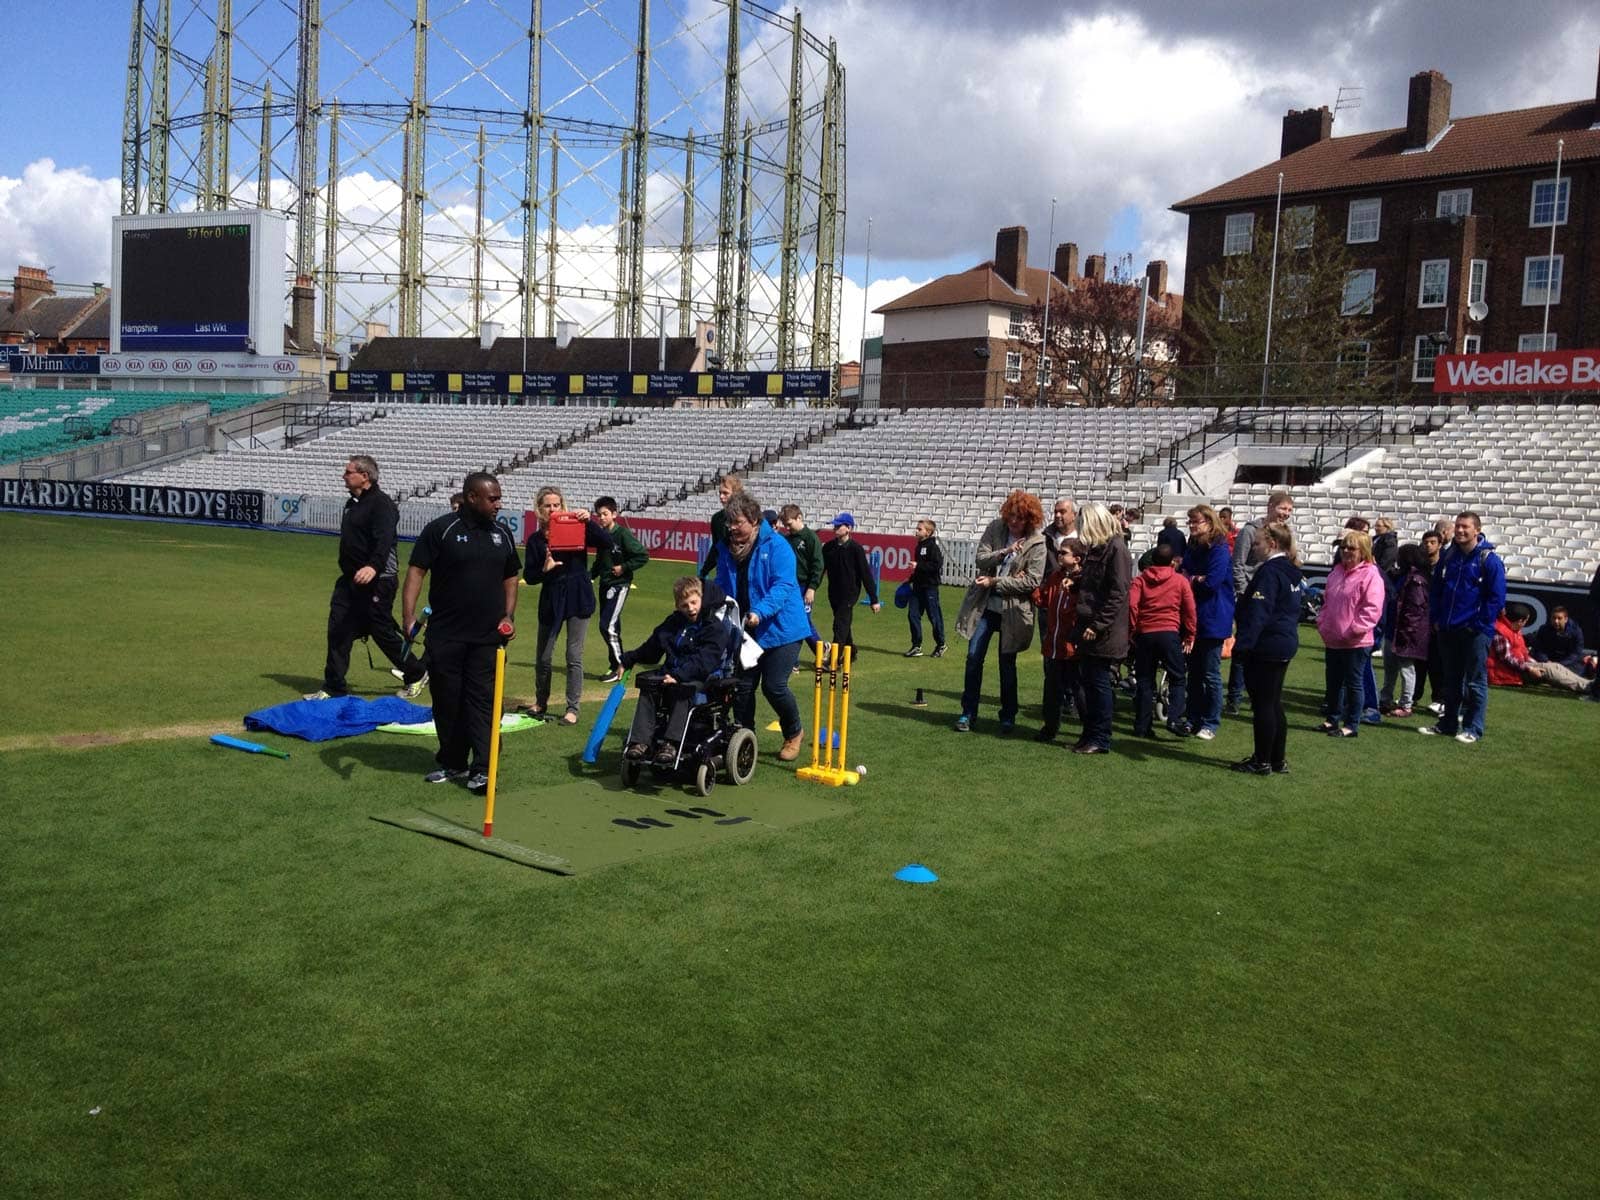 The cricket coaching mat is used at the Brit Oval for a disability day